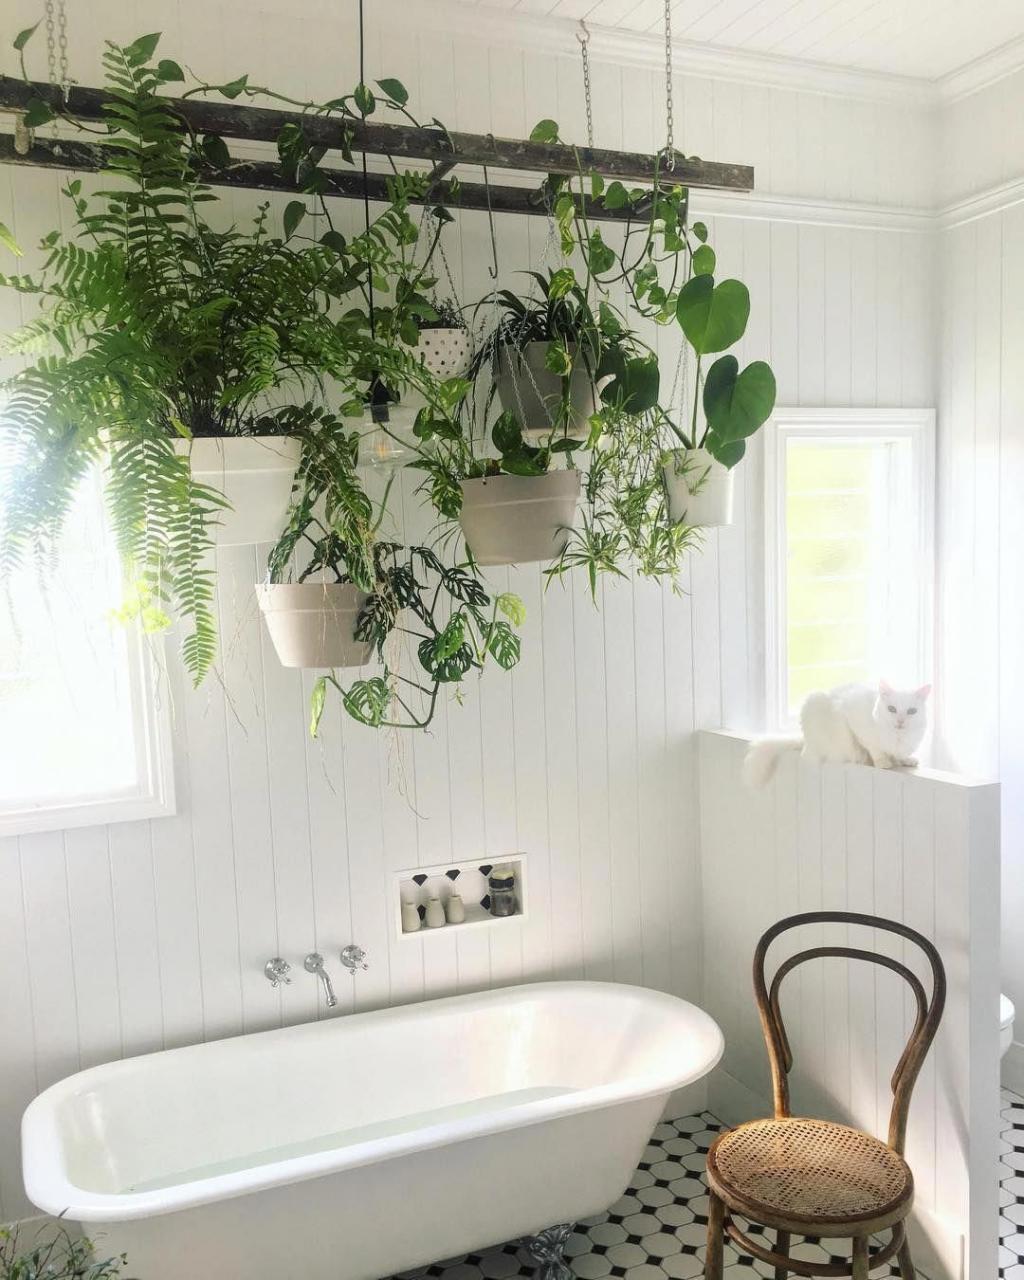 Do you know about the trend for bathroom plants? This ‘quick fix’ for